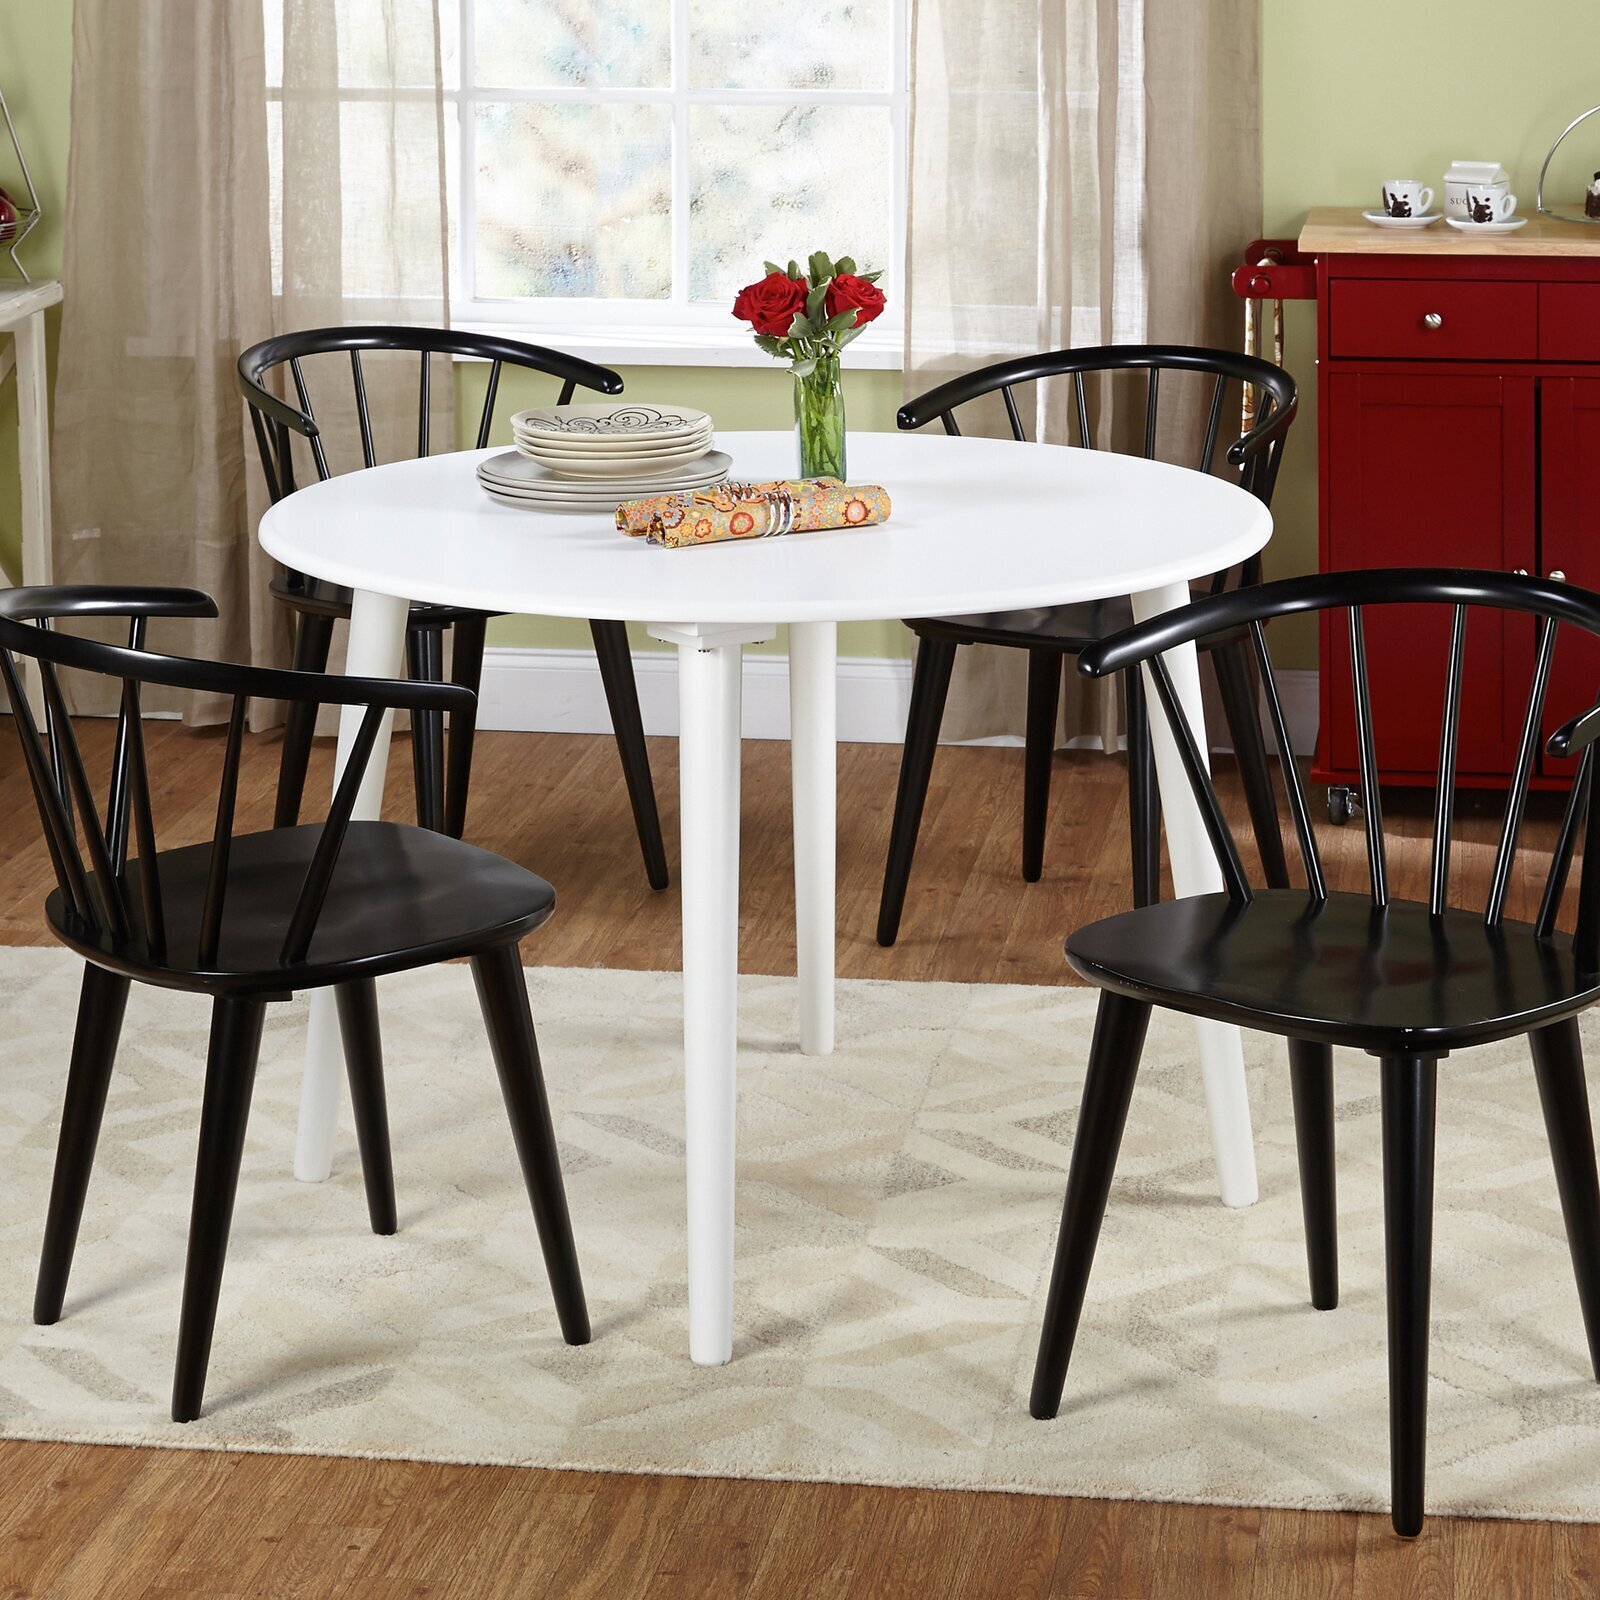 Minimalist Windsor Table and Chairs